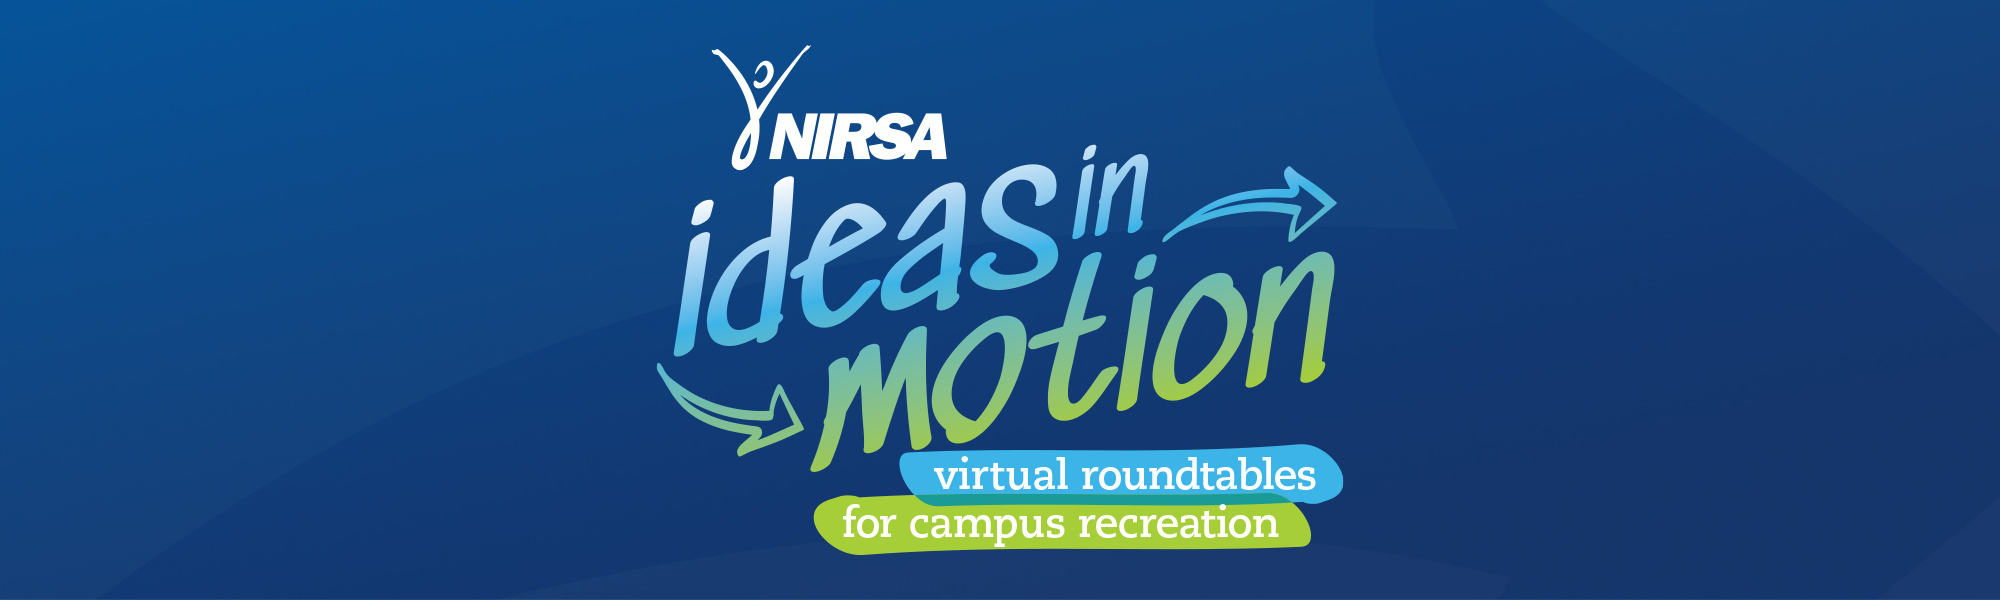 The NIRSA School for Early Career Professionals